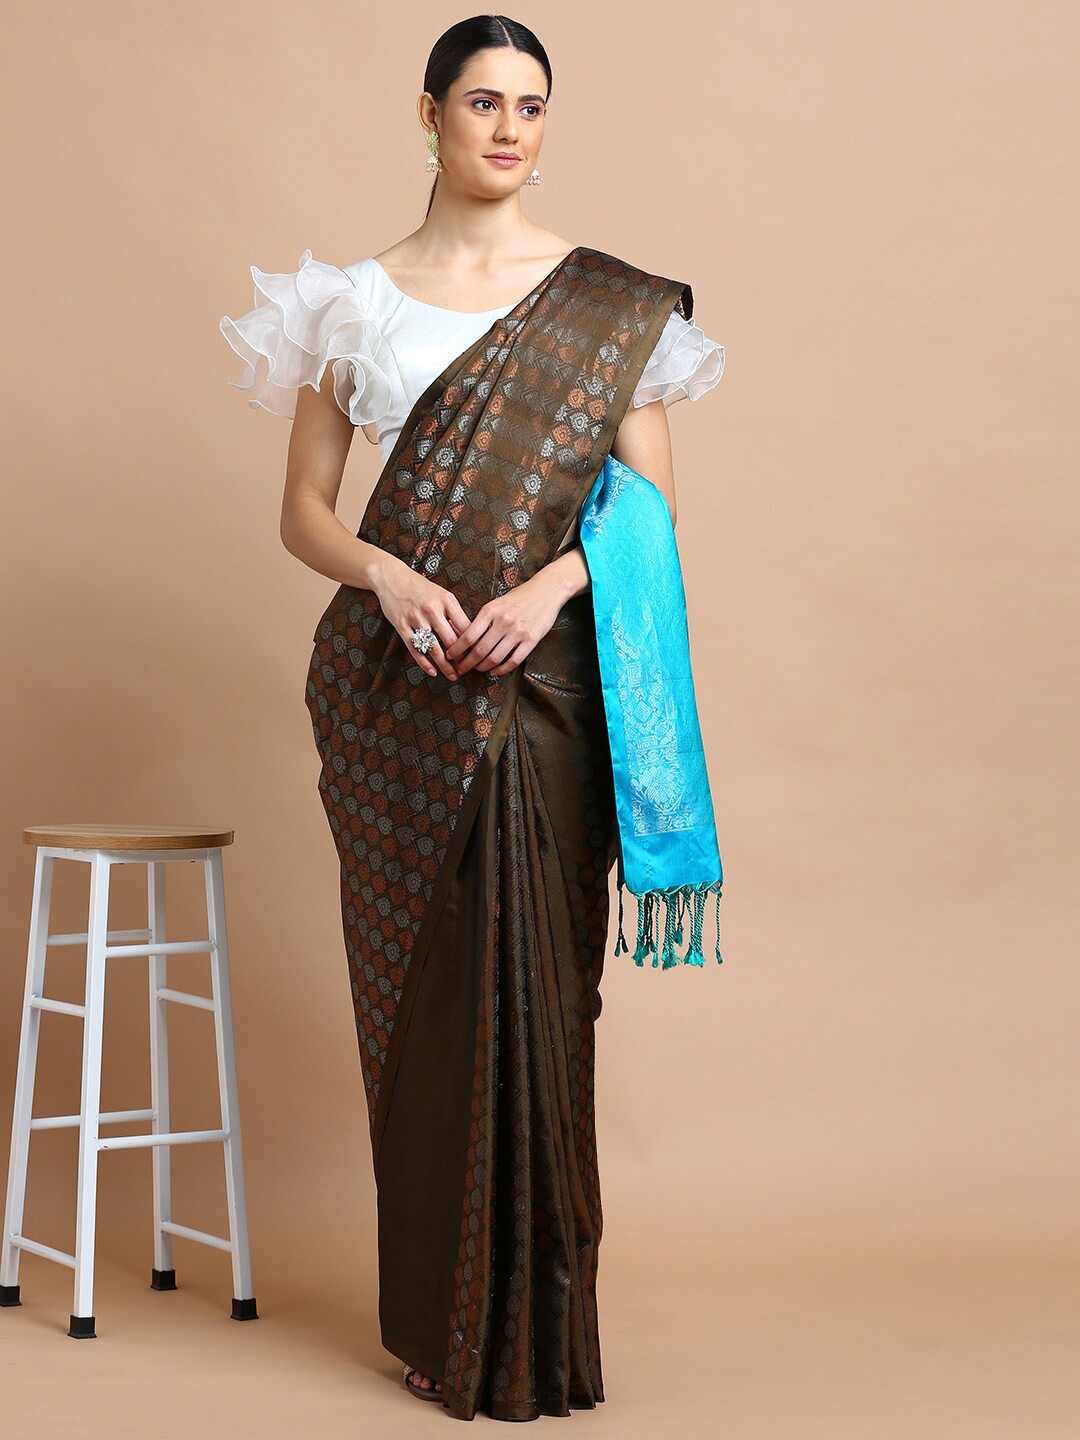 Kalyan Silks - The Kanchipuram Silk Sarees are made of pure silk, with  motifs having zari of silk threads dipped in liquid gold and silver.The  appeal of the Kanjeevaram Silks lies in